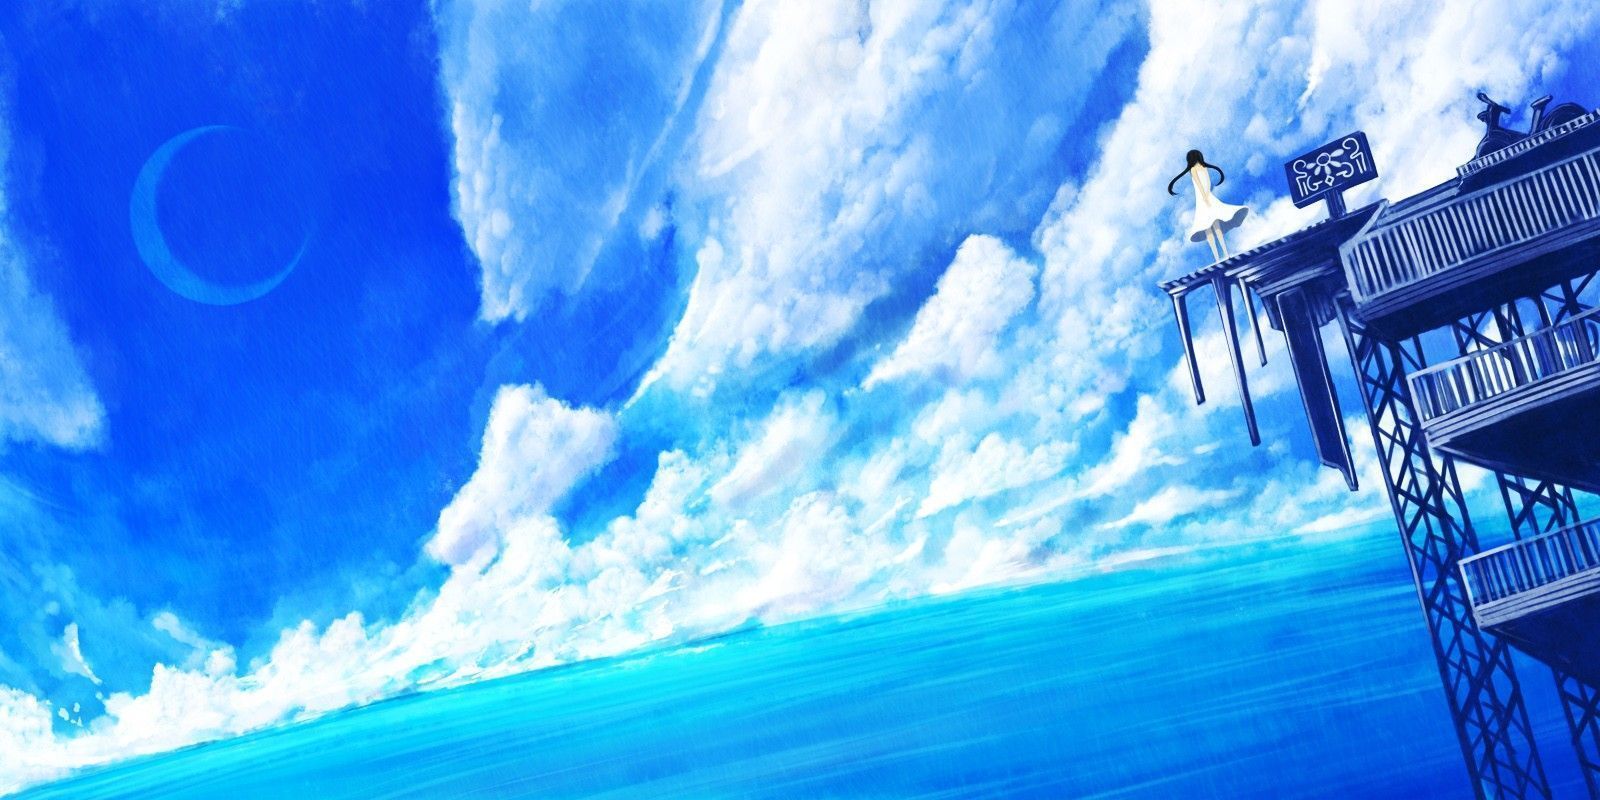 Free Download Cool Blue Anime Image